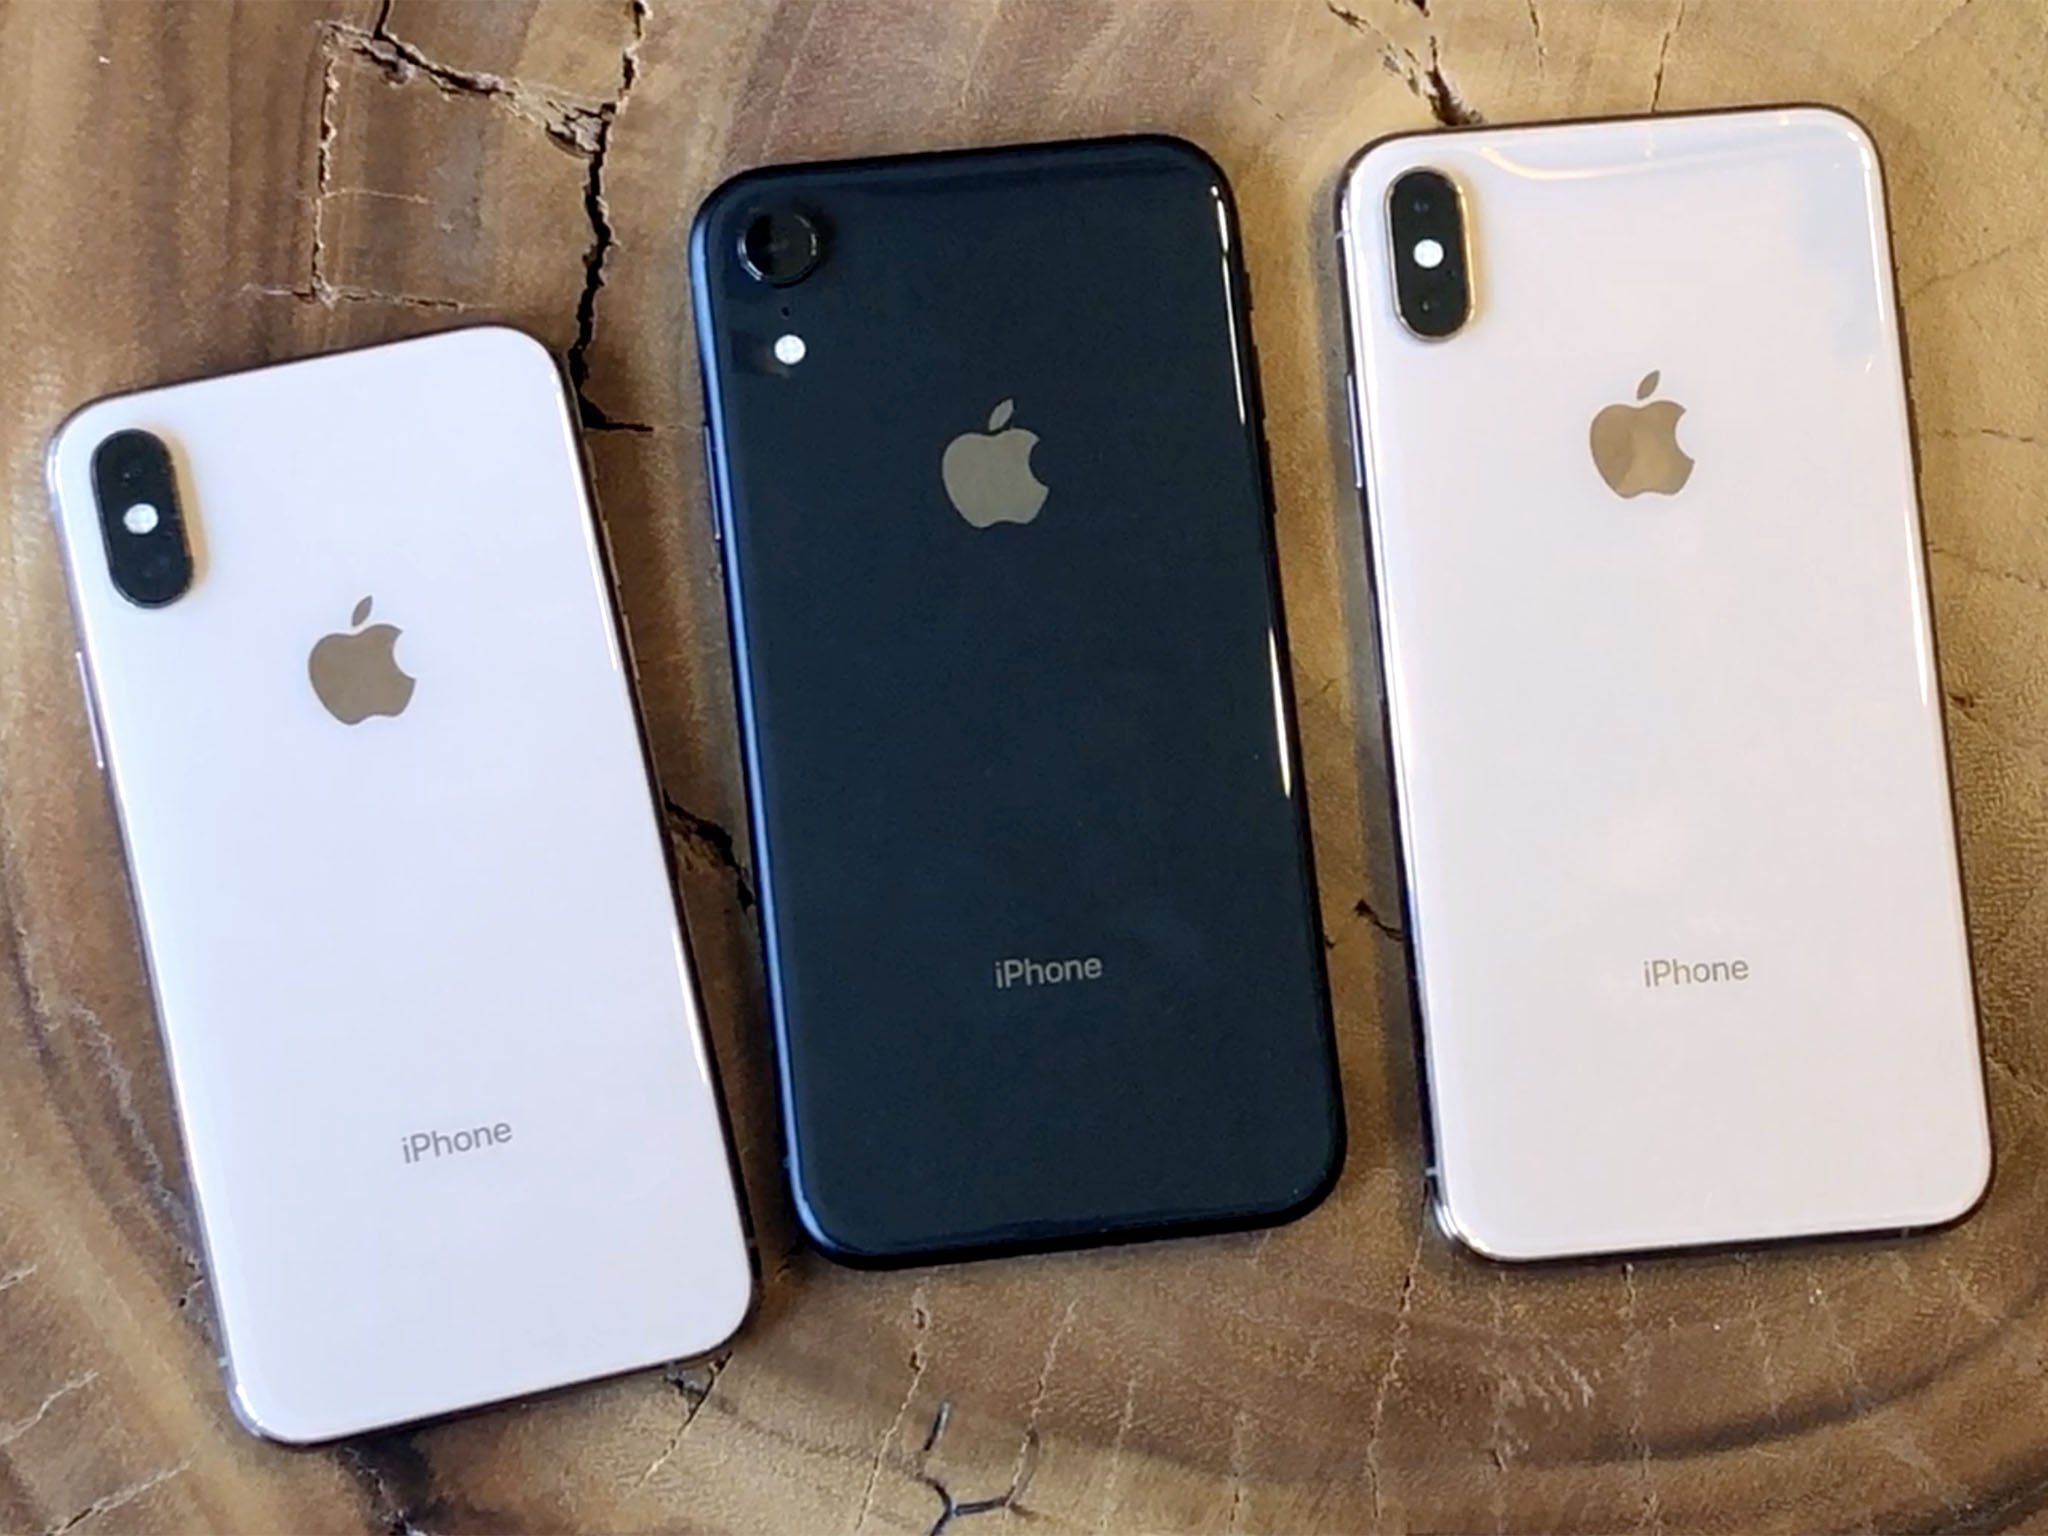 iPhone XR vs iPhone XS: Which should you buy? | iMore